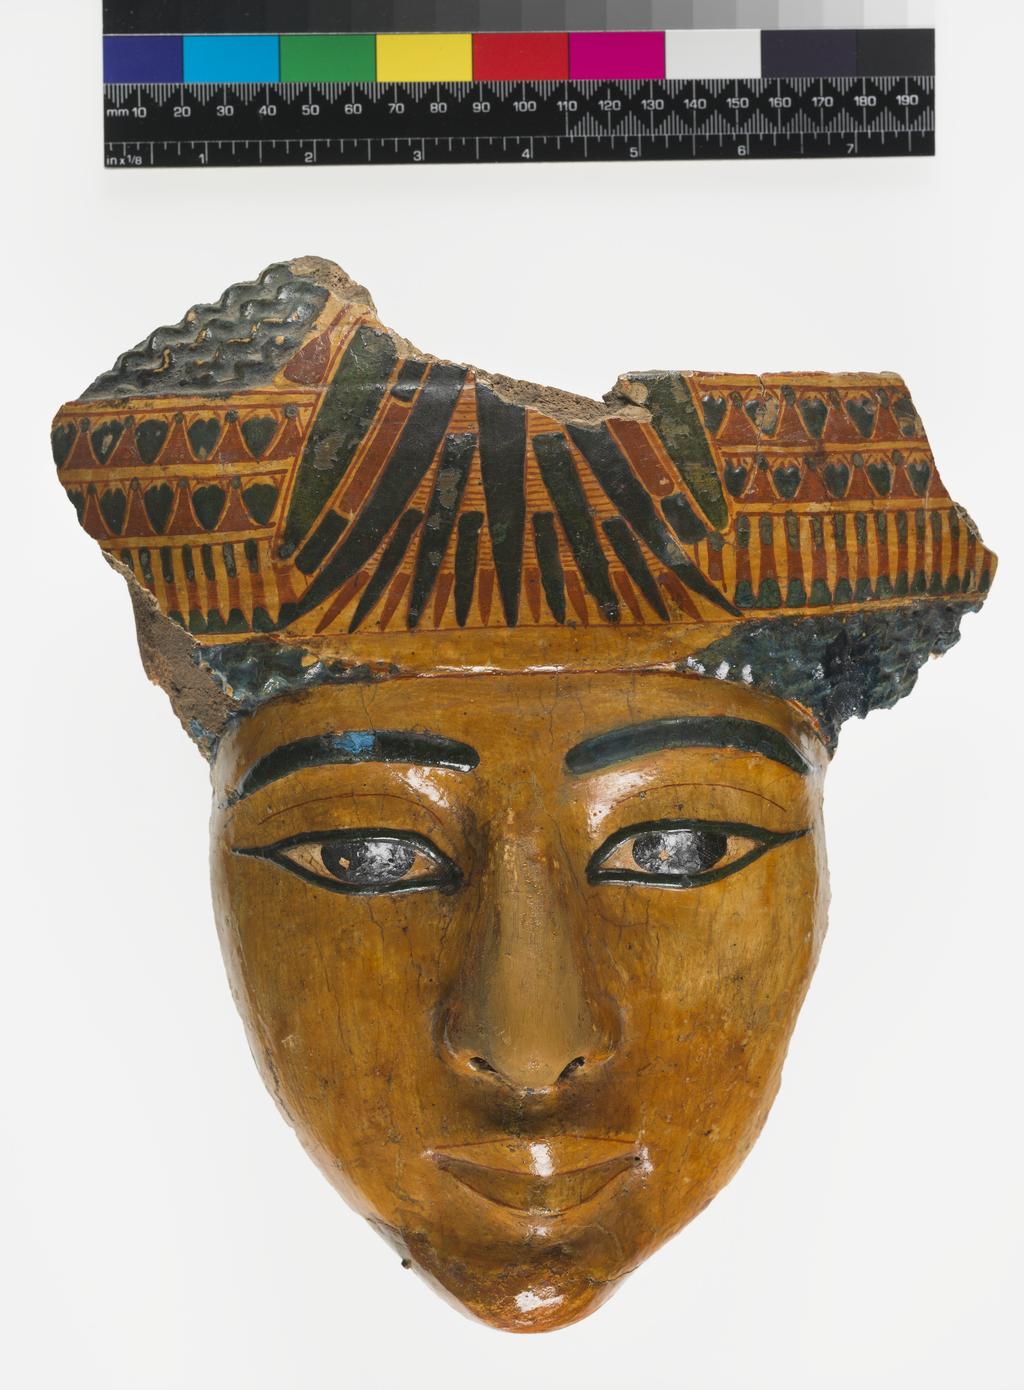 An image of Funerary equipment. Face from coffin, polychrome and varnished. Chin and nose heavily restored during the Twentieth Century. Production Place: Egypt. Find Spot: Thebes. Width 21.7 cm, height 24.6 cm, thickness 5.4 cm, 1070-735 B.C. (dating not confident). Twenty-first Dynasty. Third Intermediate period.